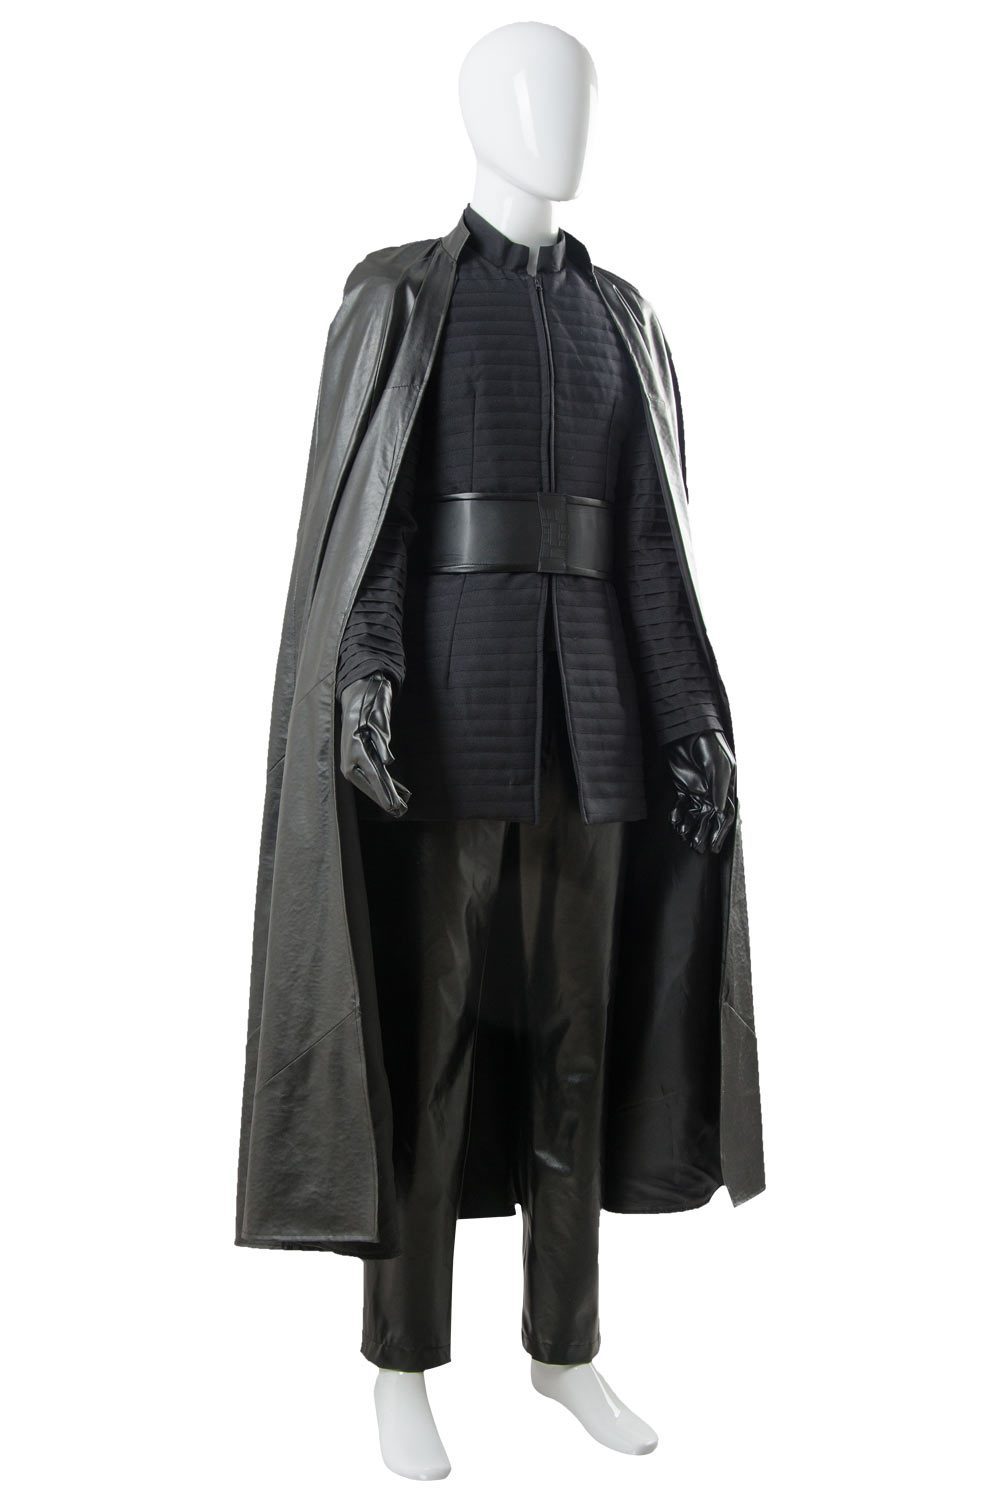 SeeCosplay The Last Jedi Kylo Ren Outfit Ver.2 Costume SWCostume